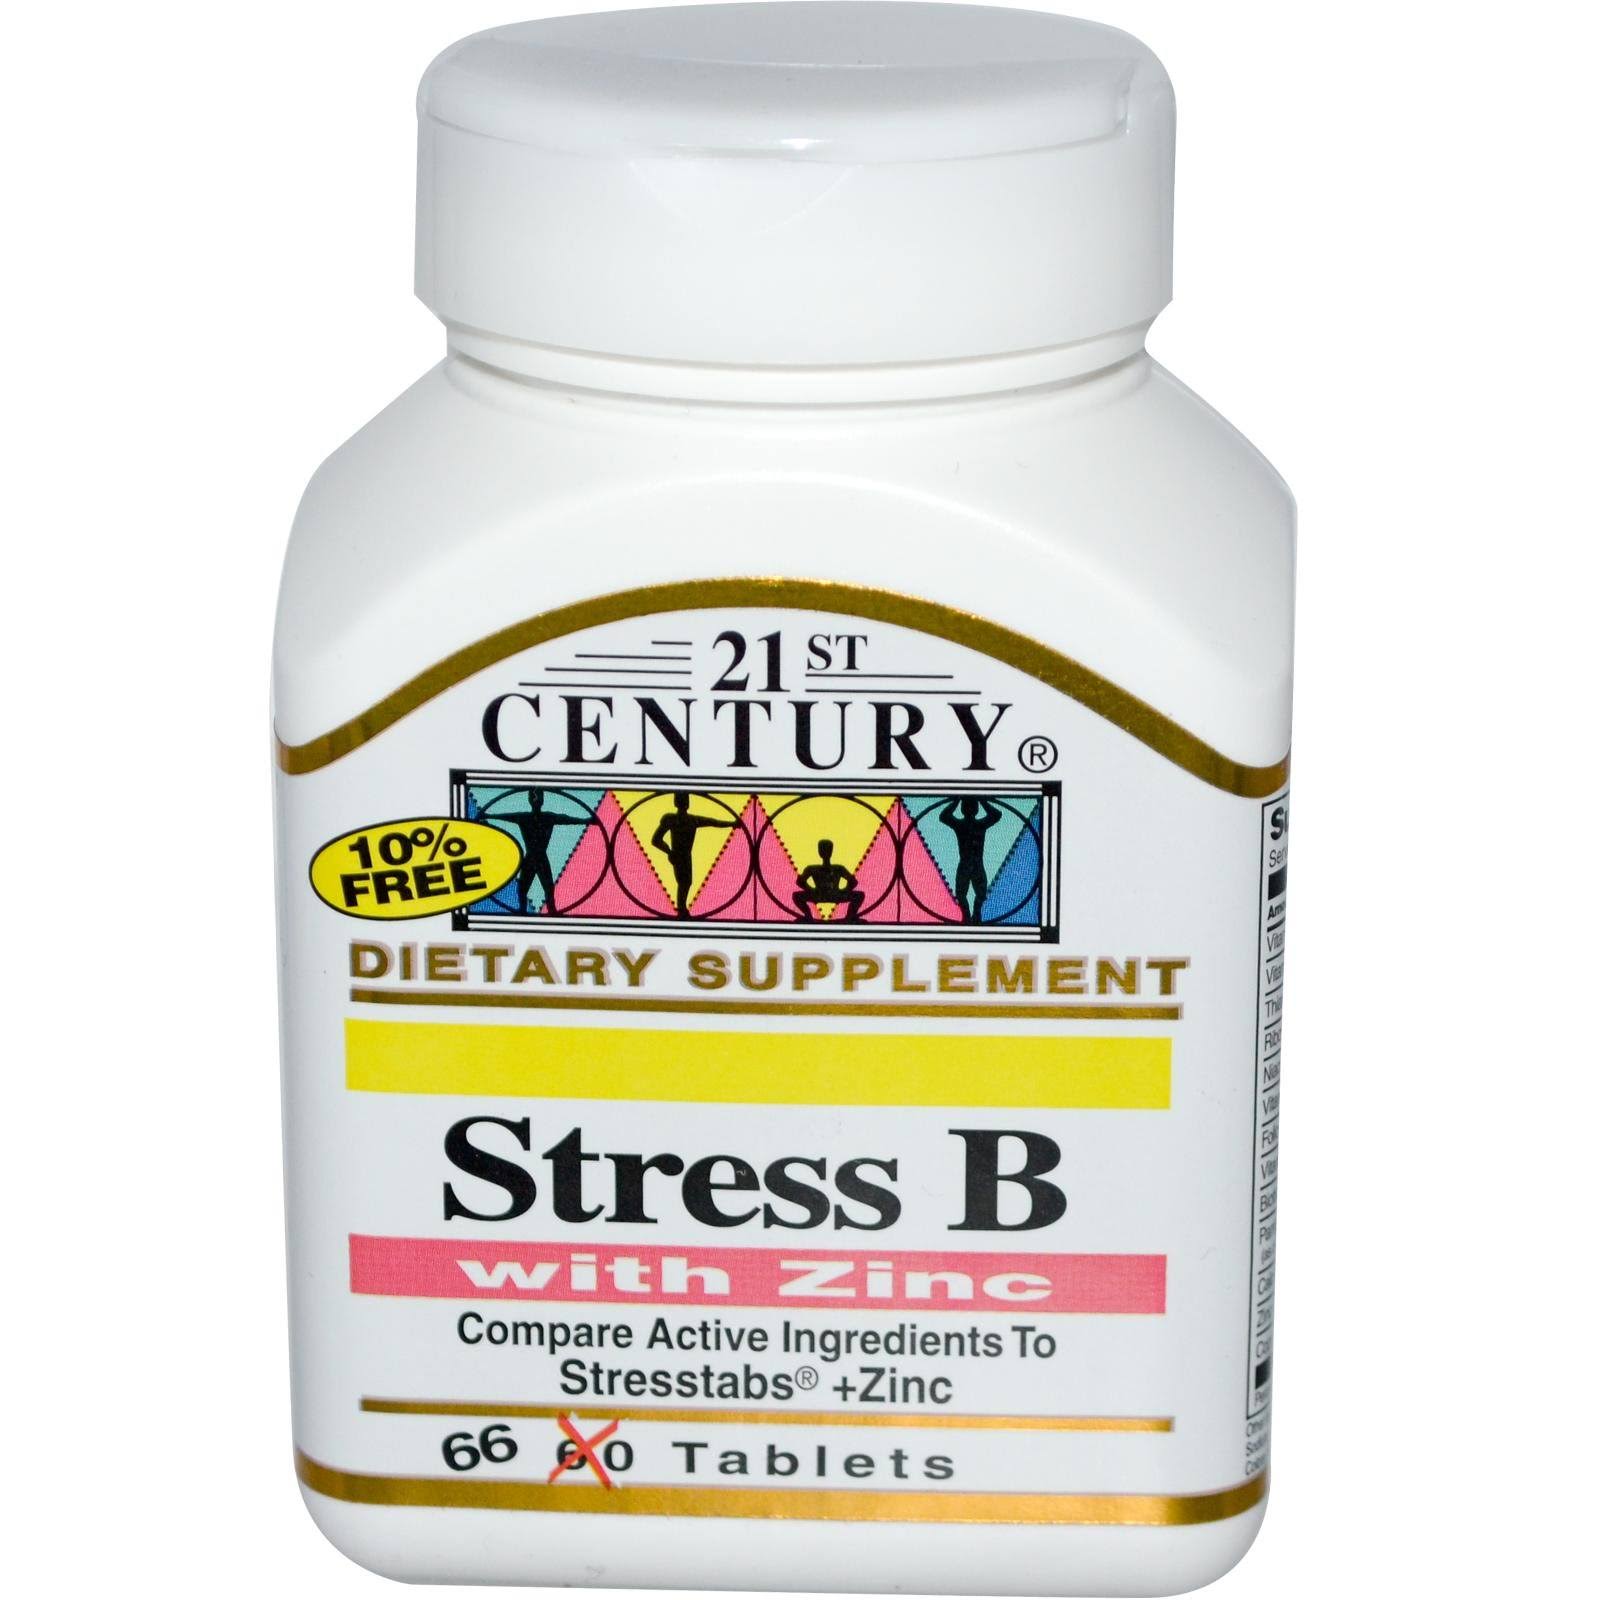 21st Century Stress B with Zinc Supplement - 66 Tablets